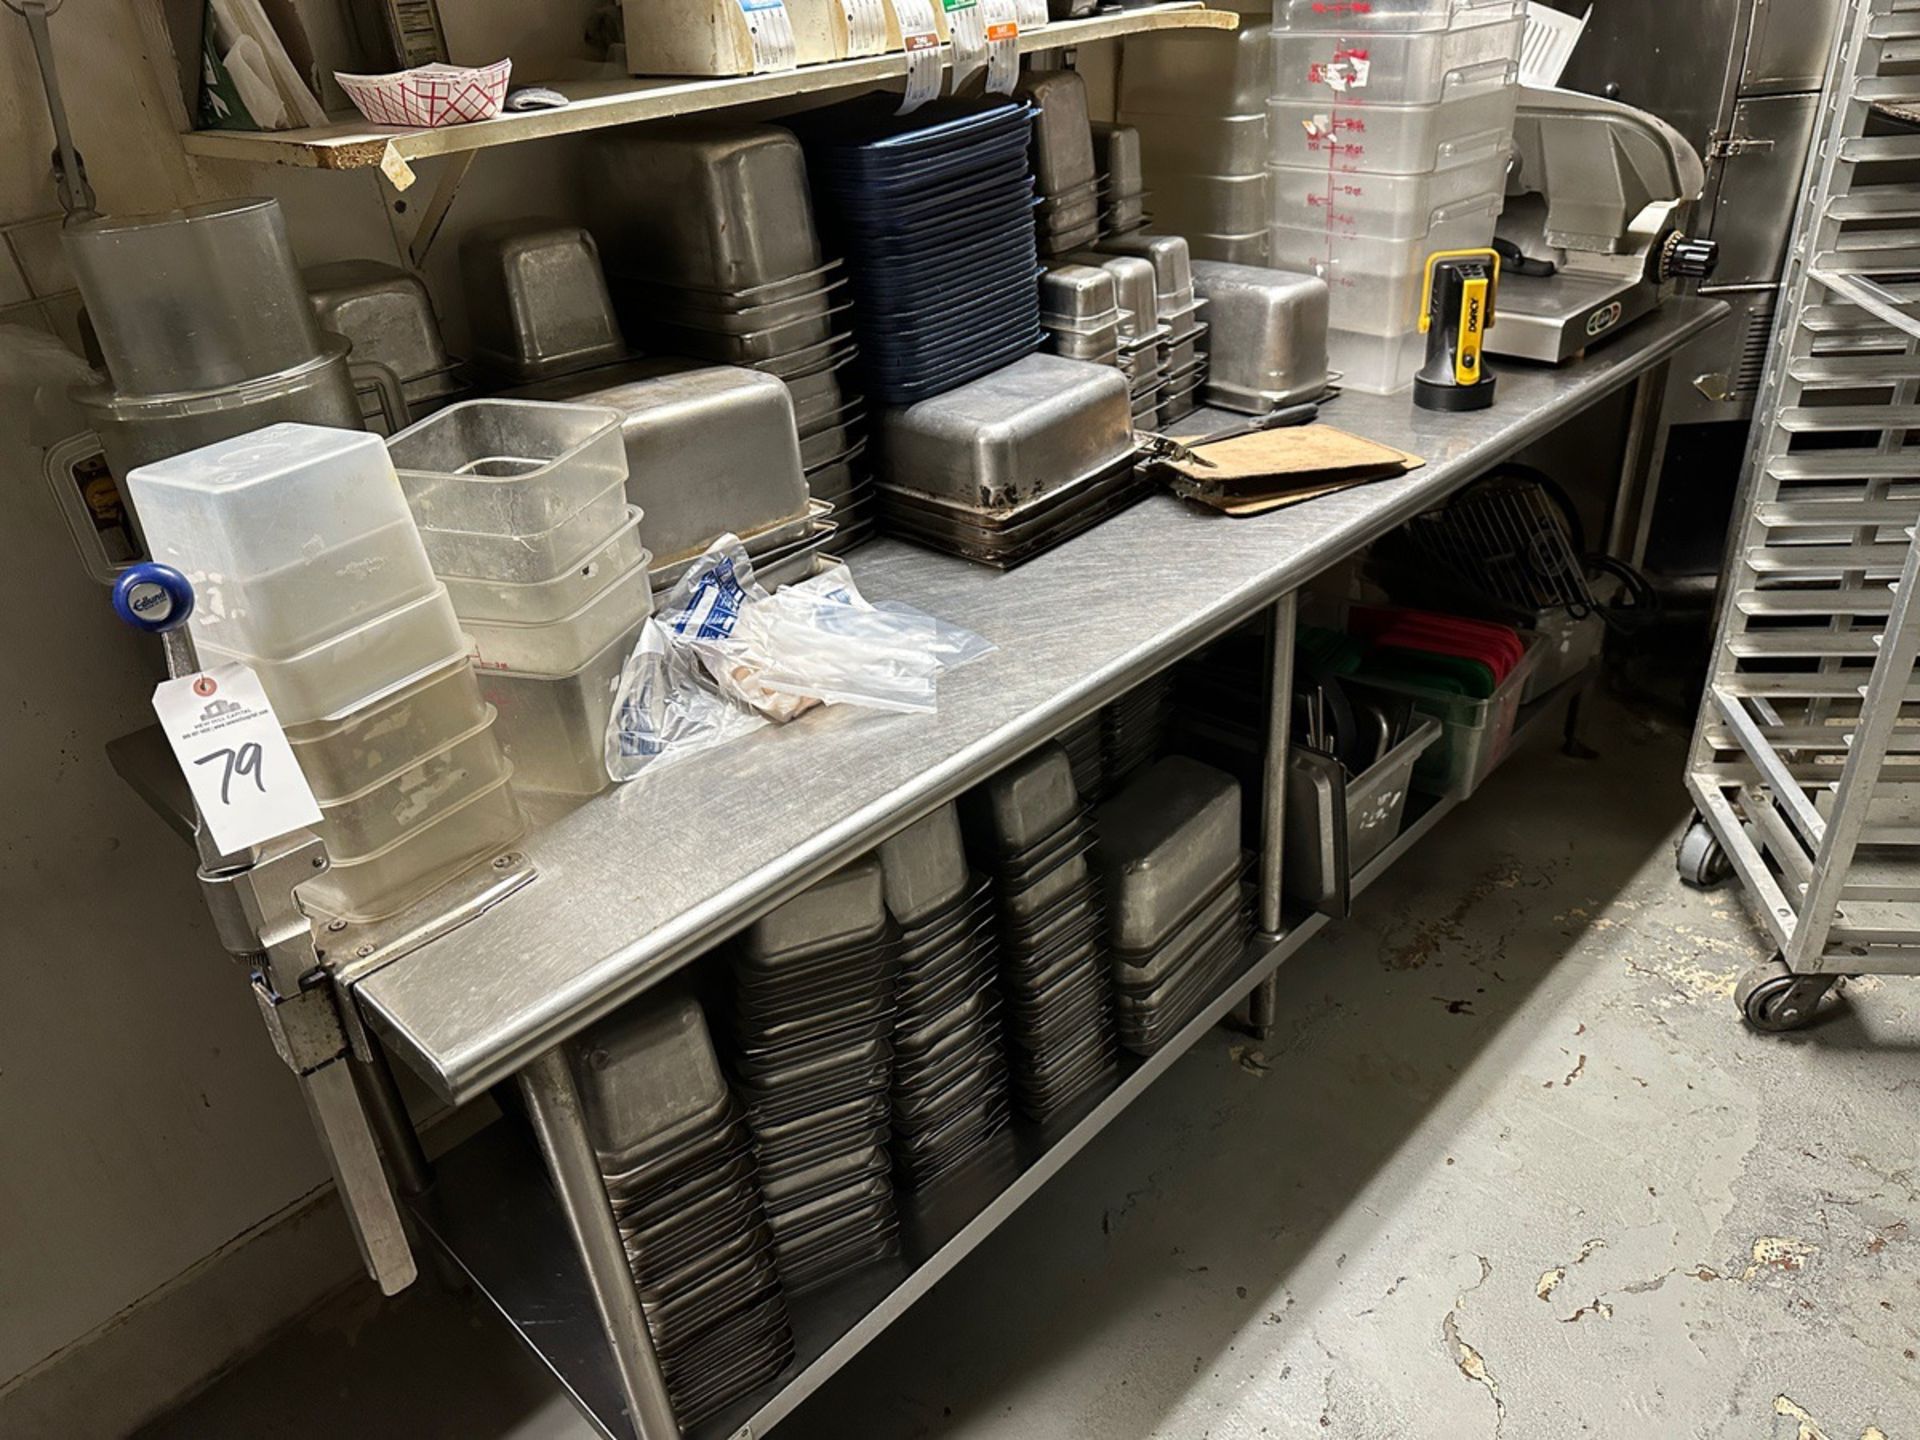 Lot of Stainless Steel Table (30" x 8') with Contents (Excluding Glob - Subj to Bulk | Rig Fee $100